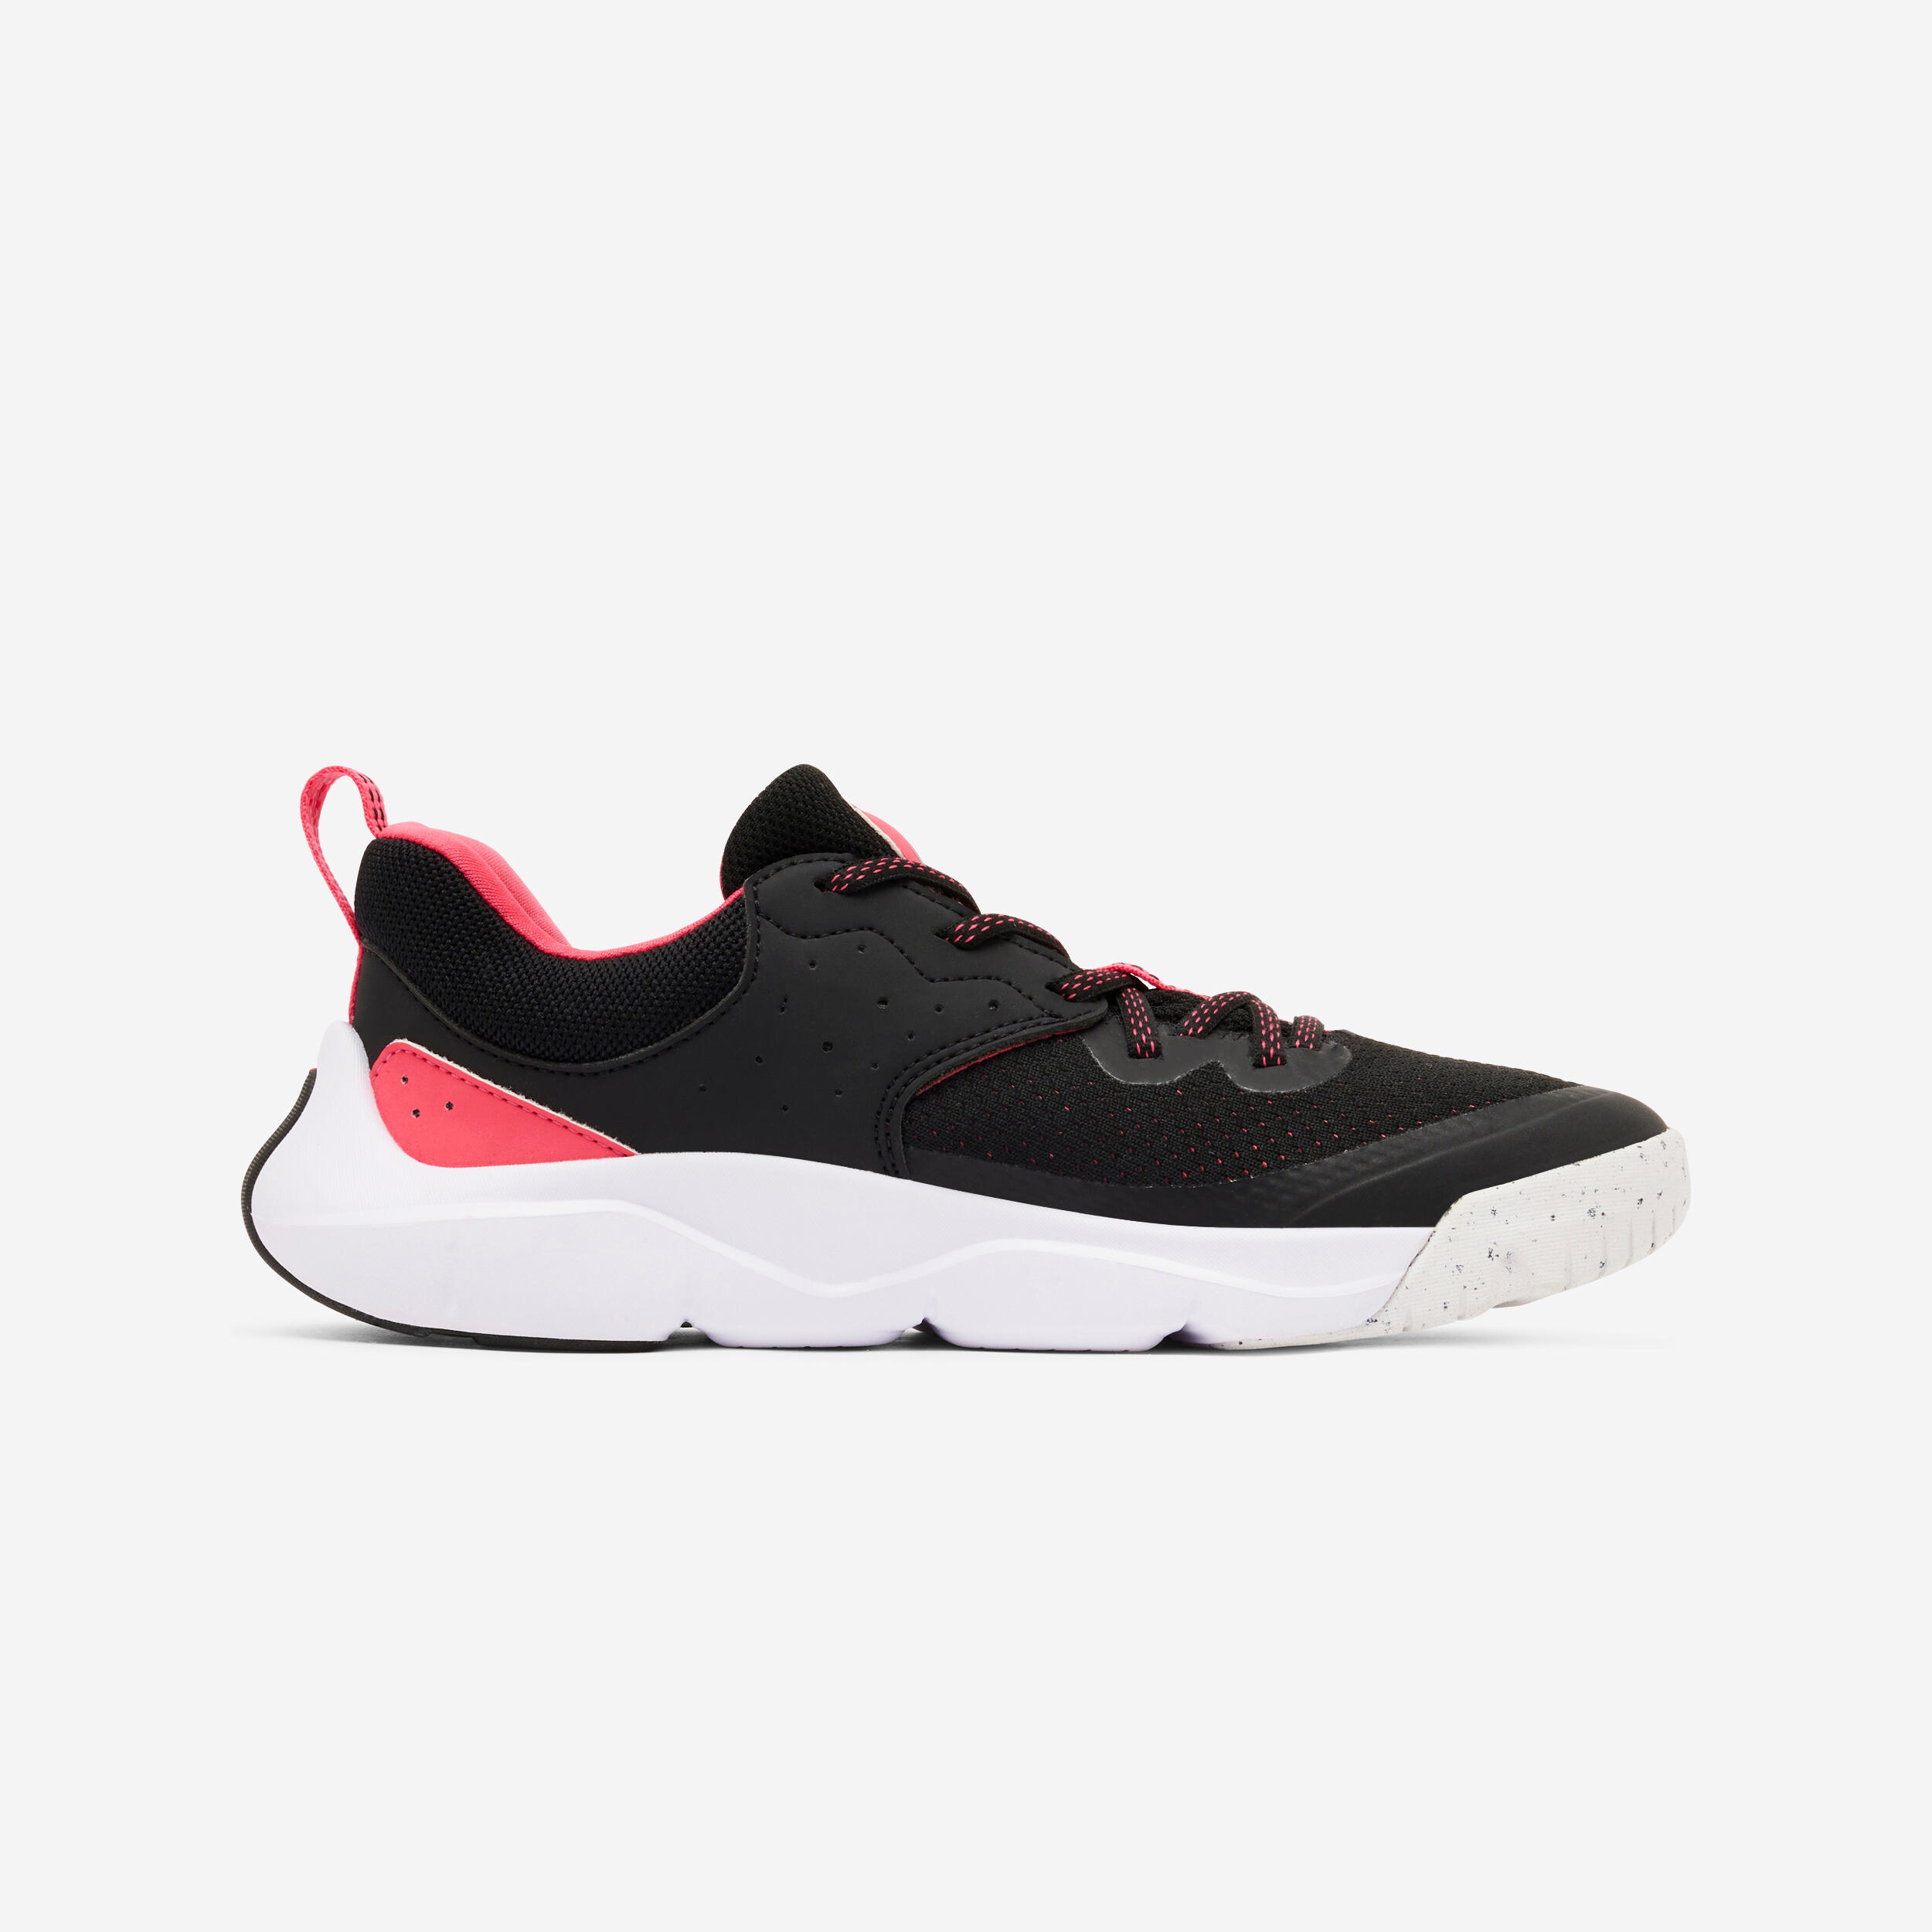 Kids' Lace-Up Shoes Playful Fast - Black/Pink 5/7